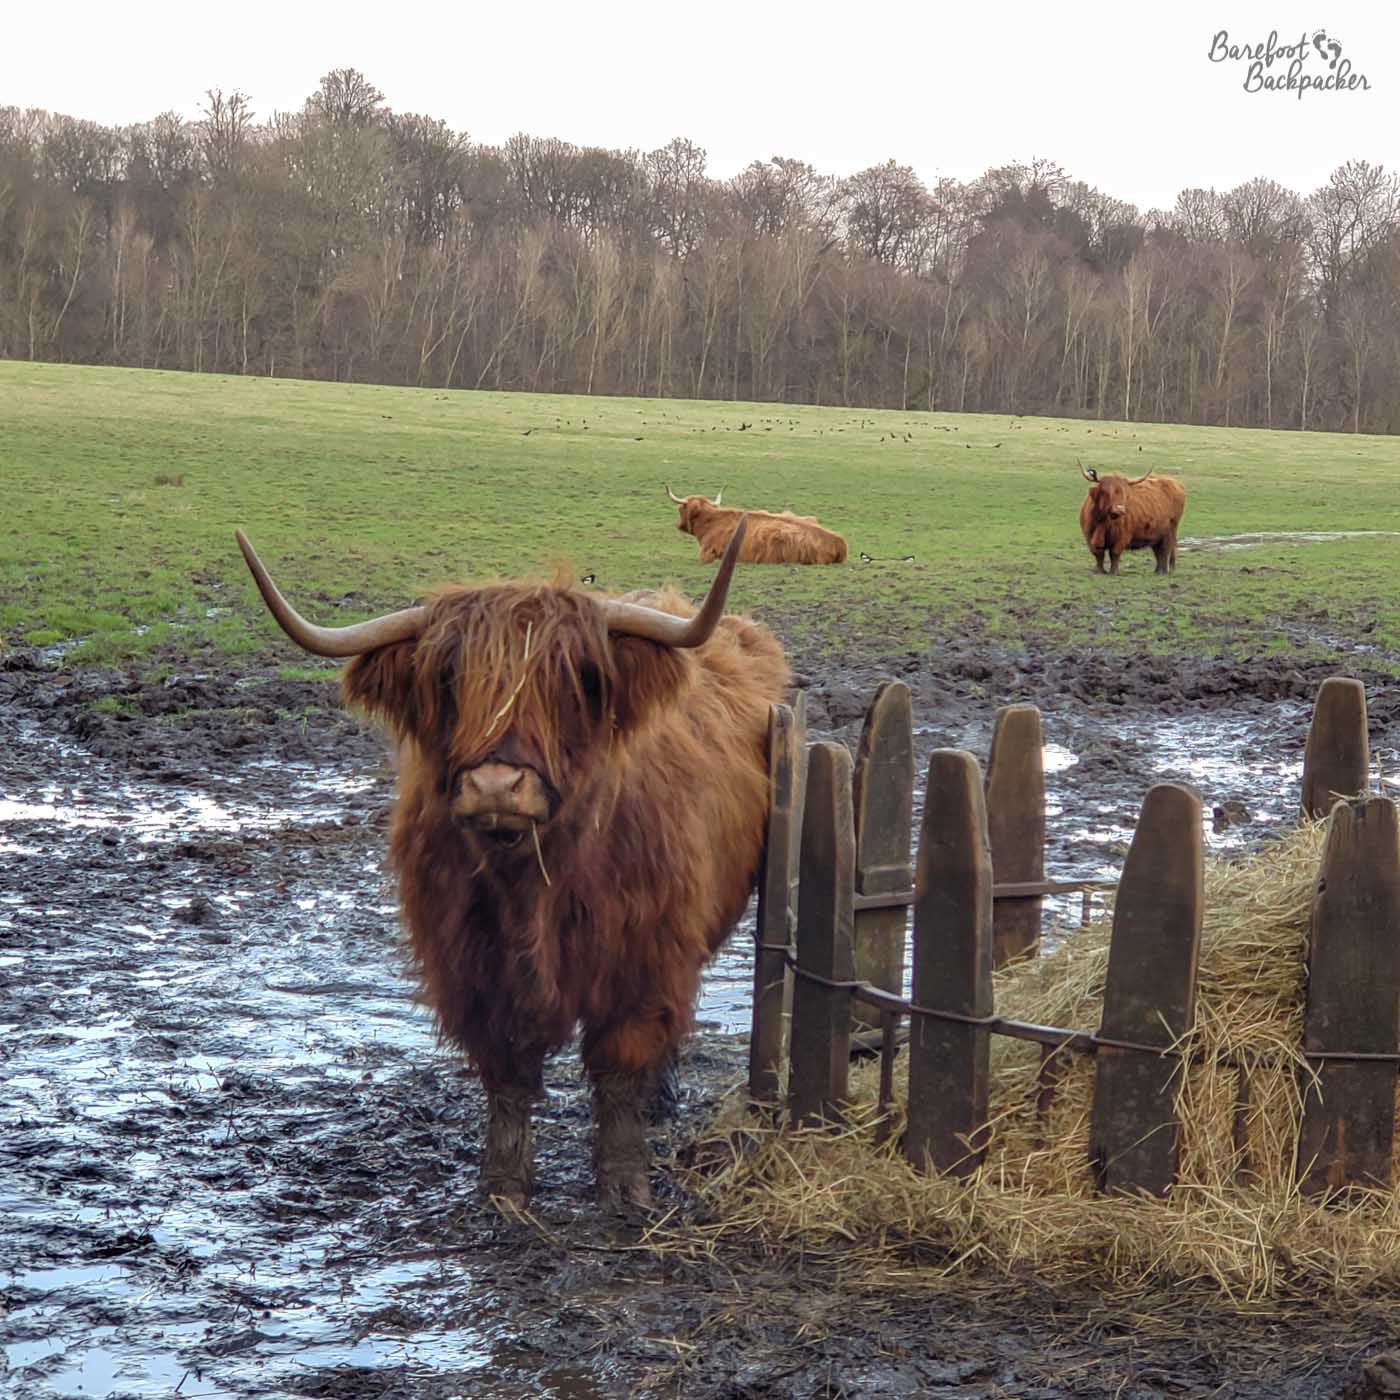 A highland cow, with horns, stands next to a fence in a muddy field.